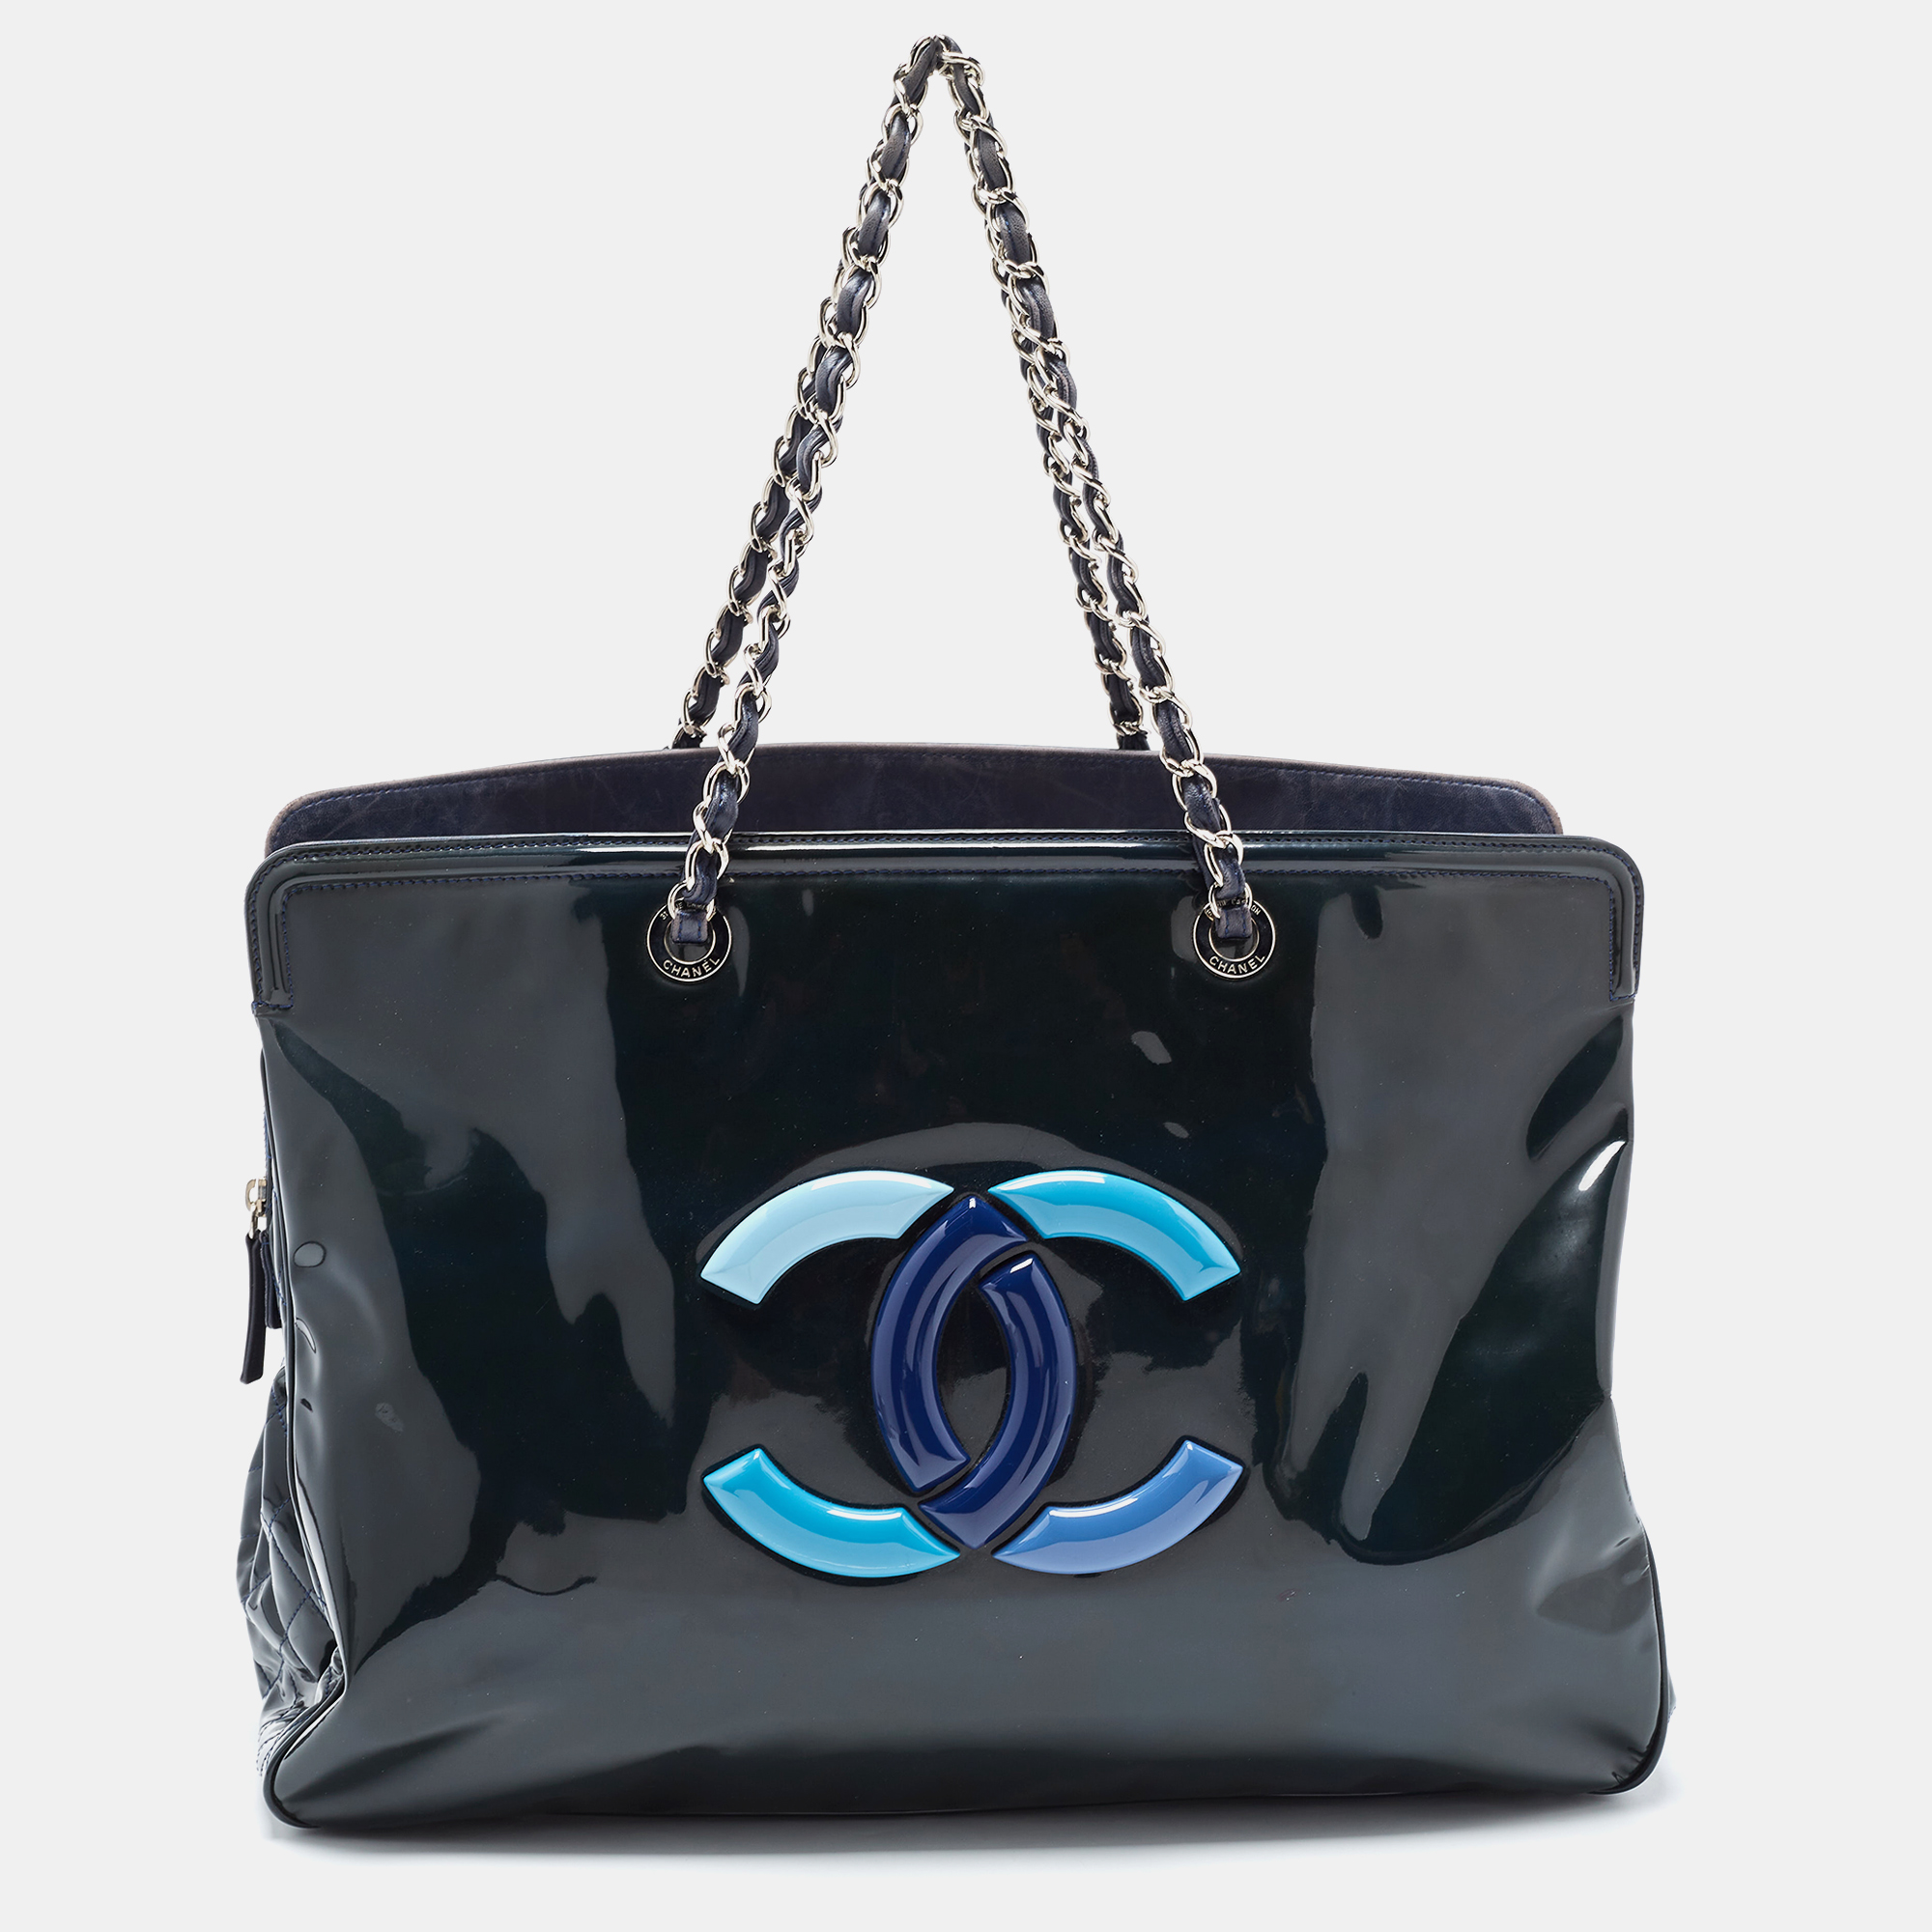 Chanel Teal Patent Leather XL Lipstick Tote